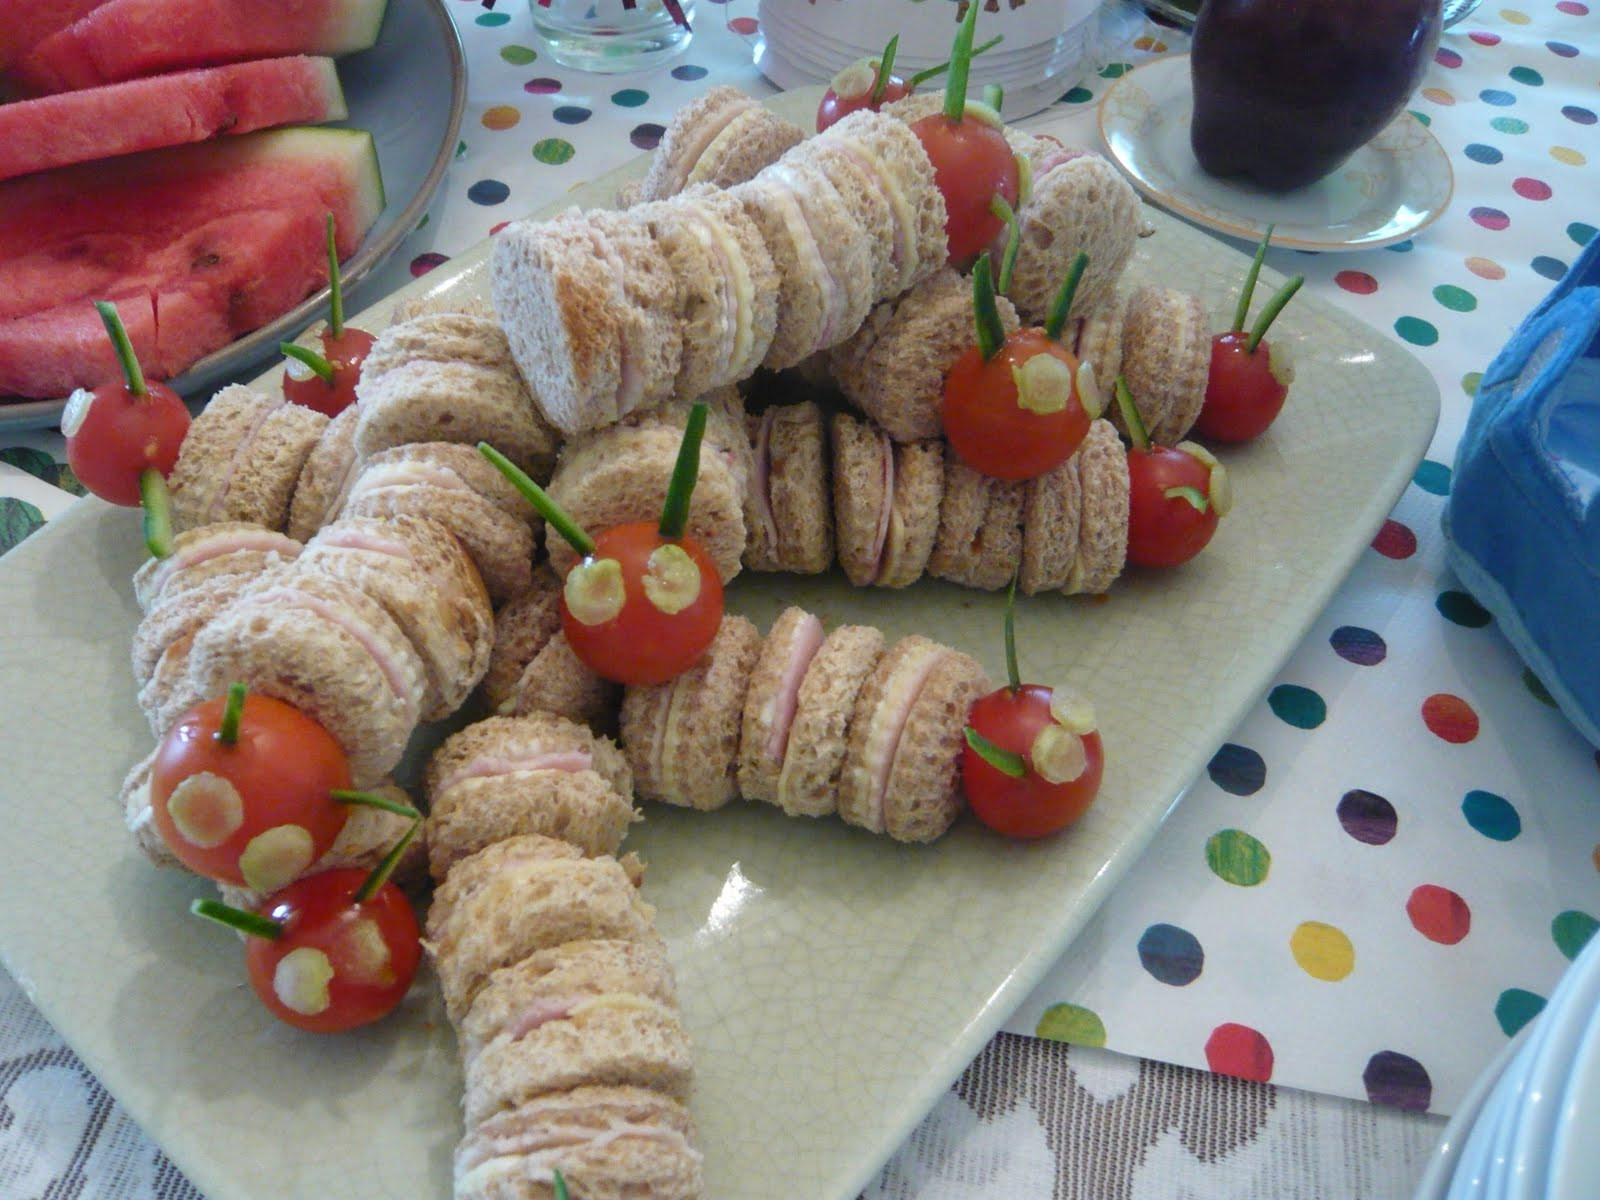 Childrens Tea Party Food Ideas
 The R Mum Diaries A Very Hungry Caterpillar Party